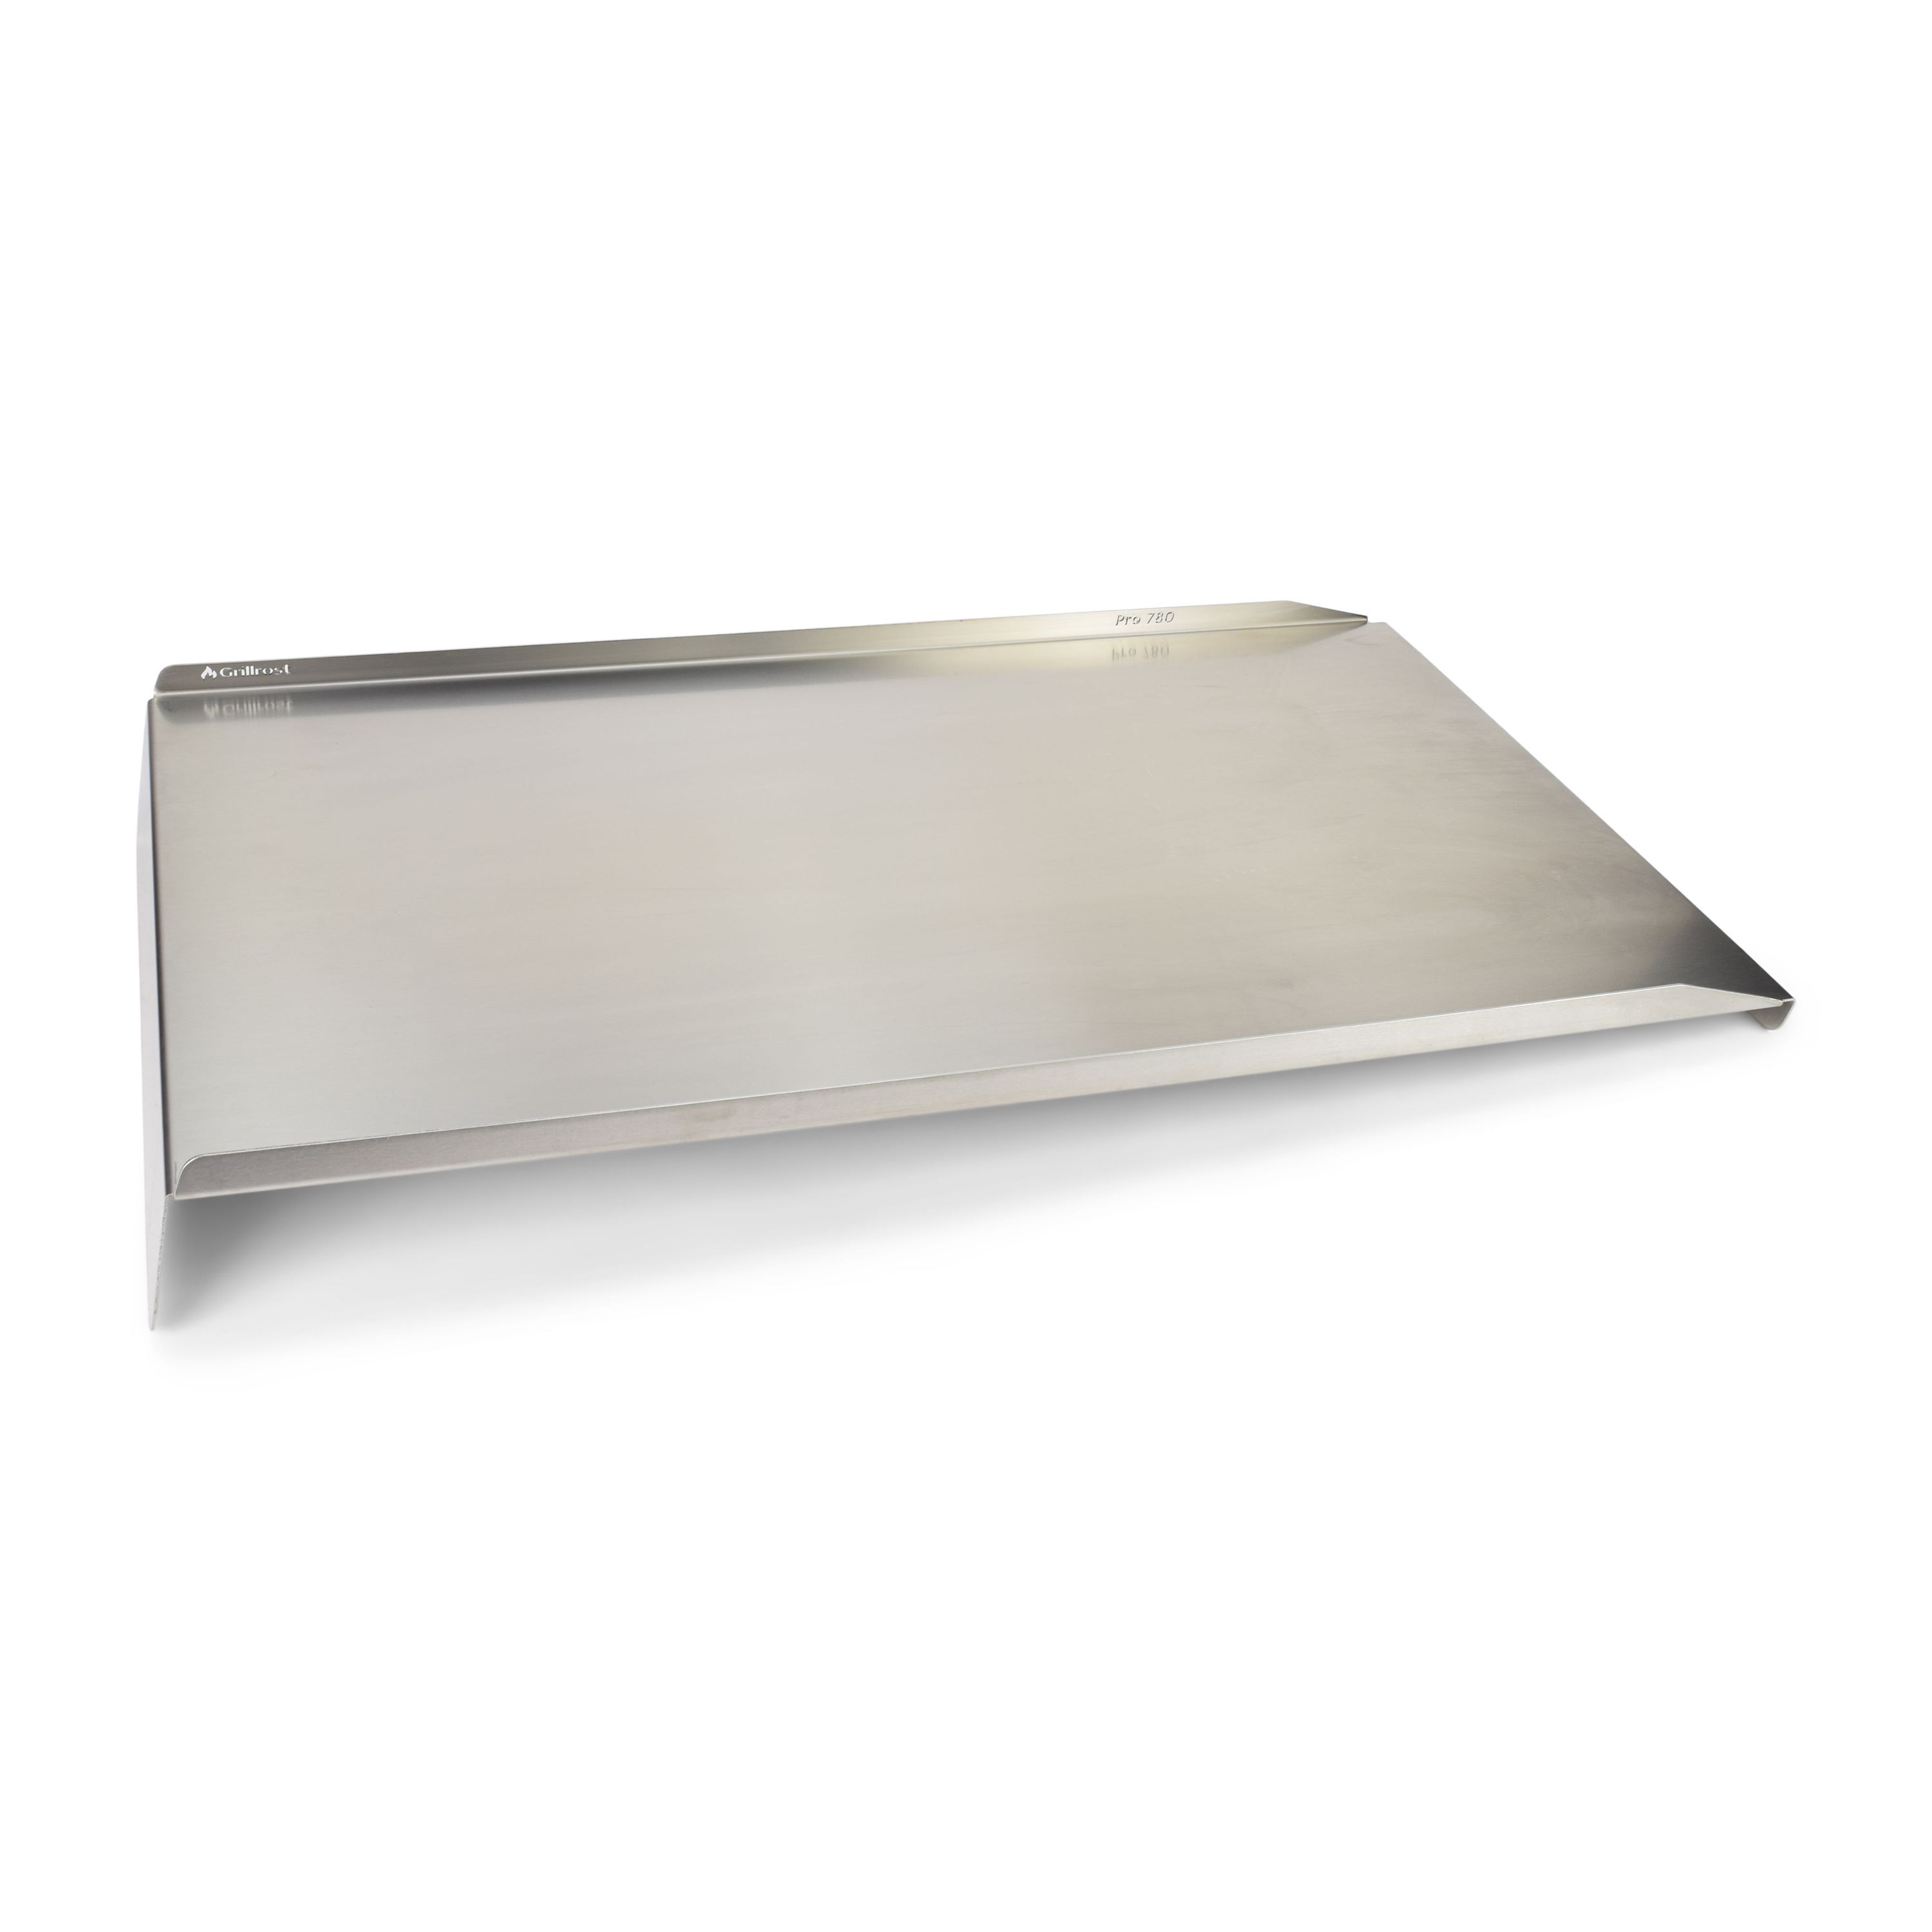 Stainless steel grease drain plate for carrier